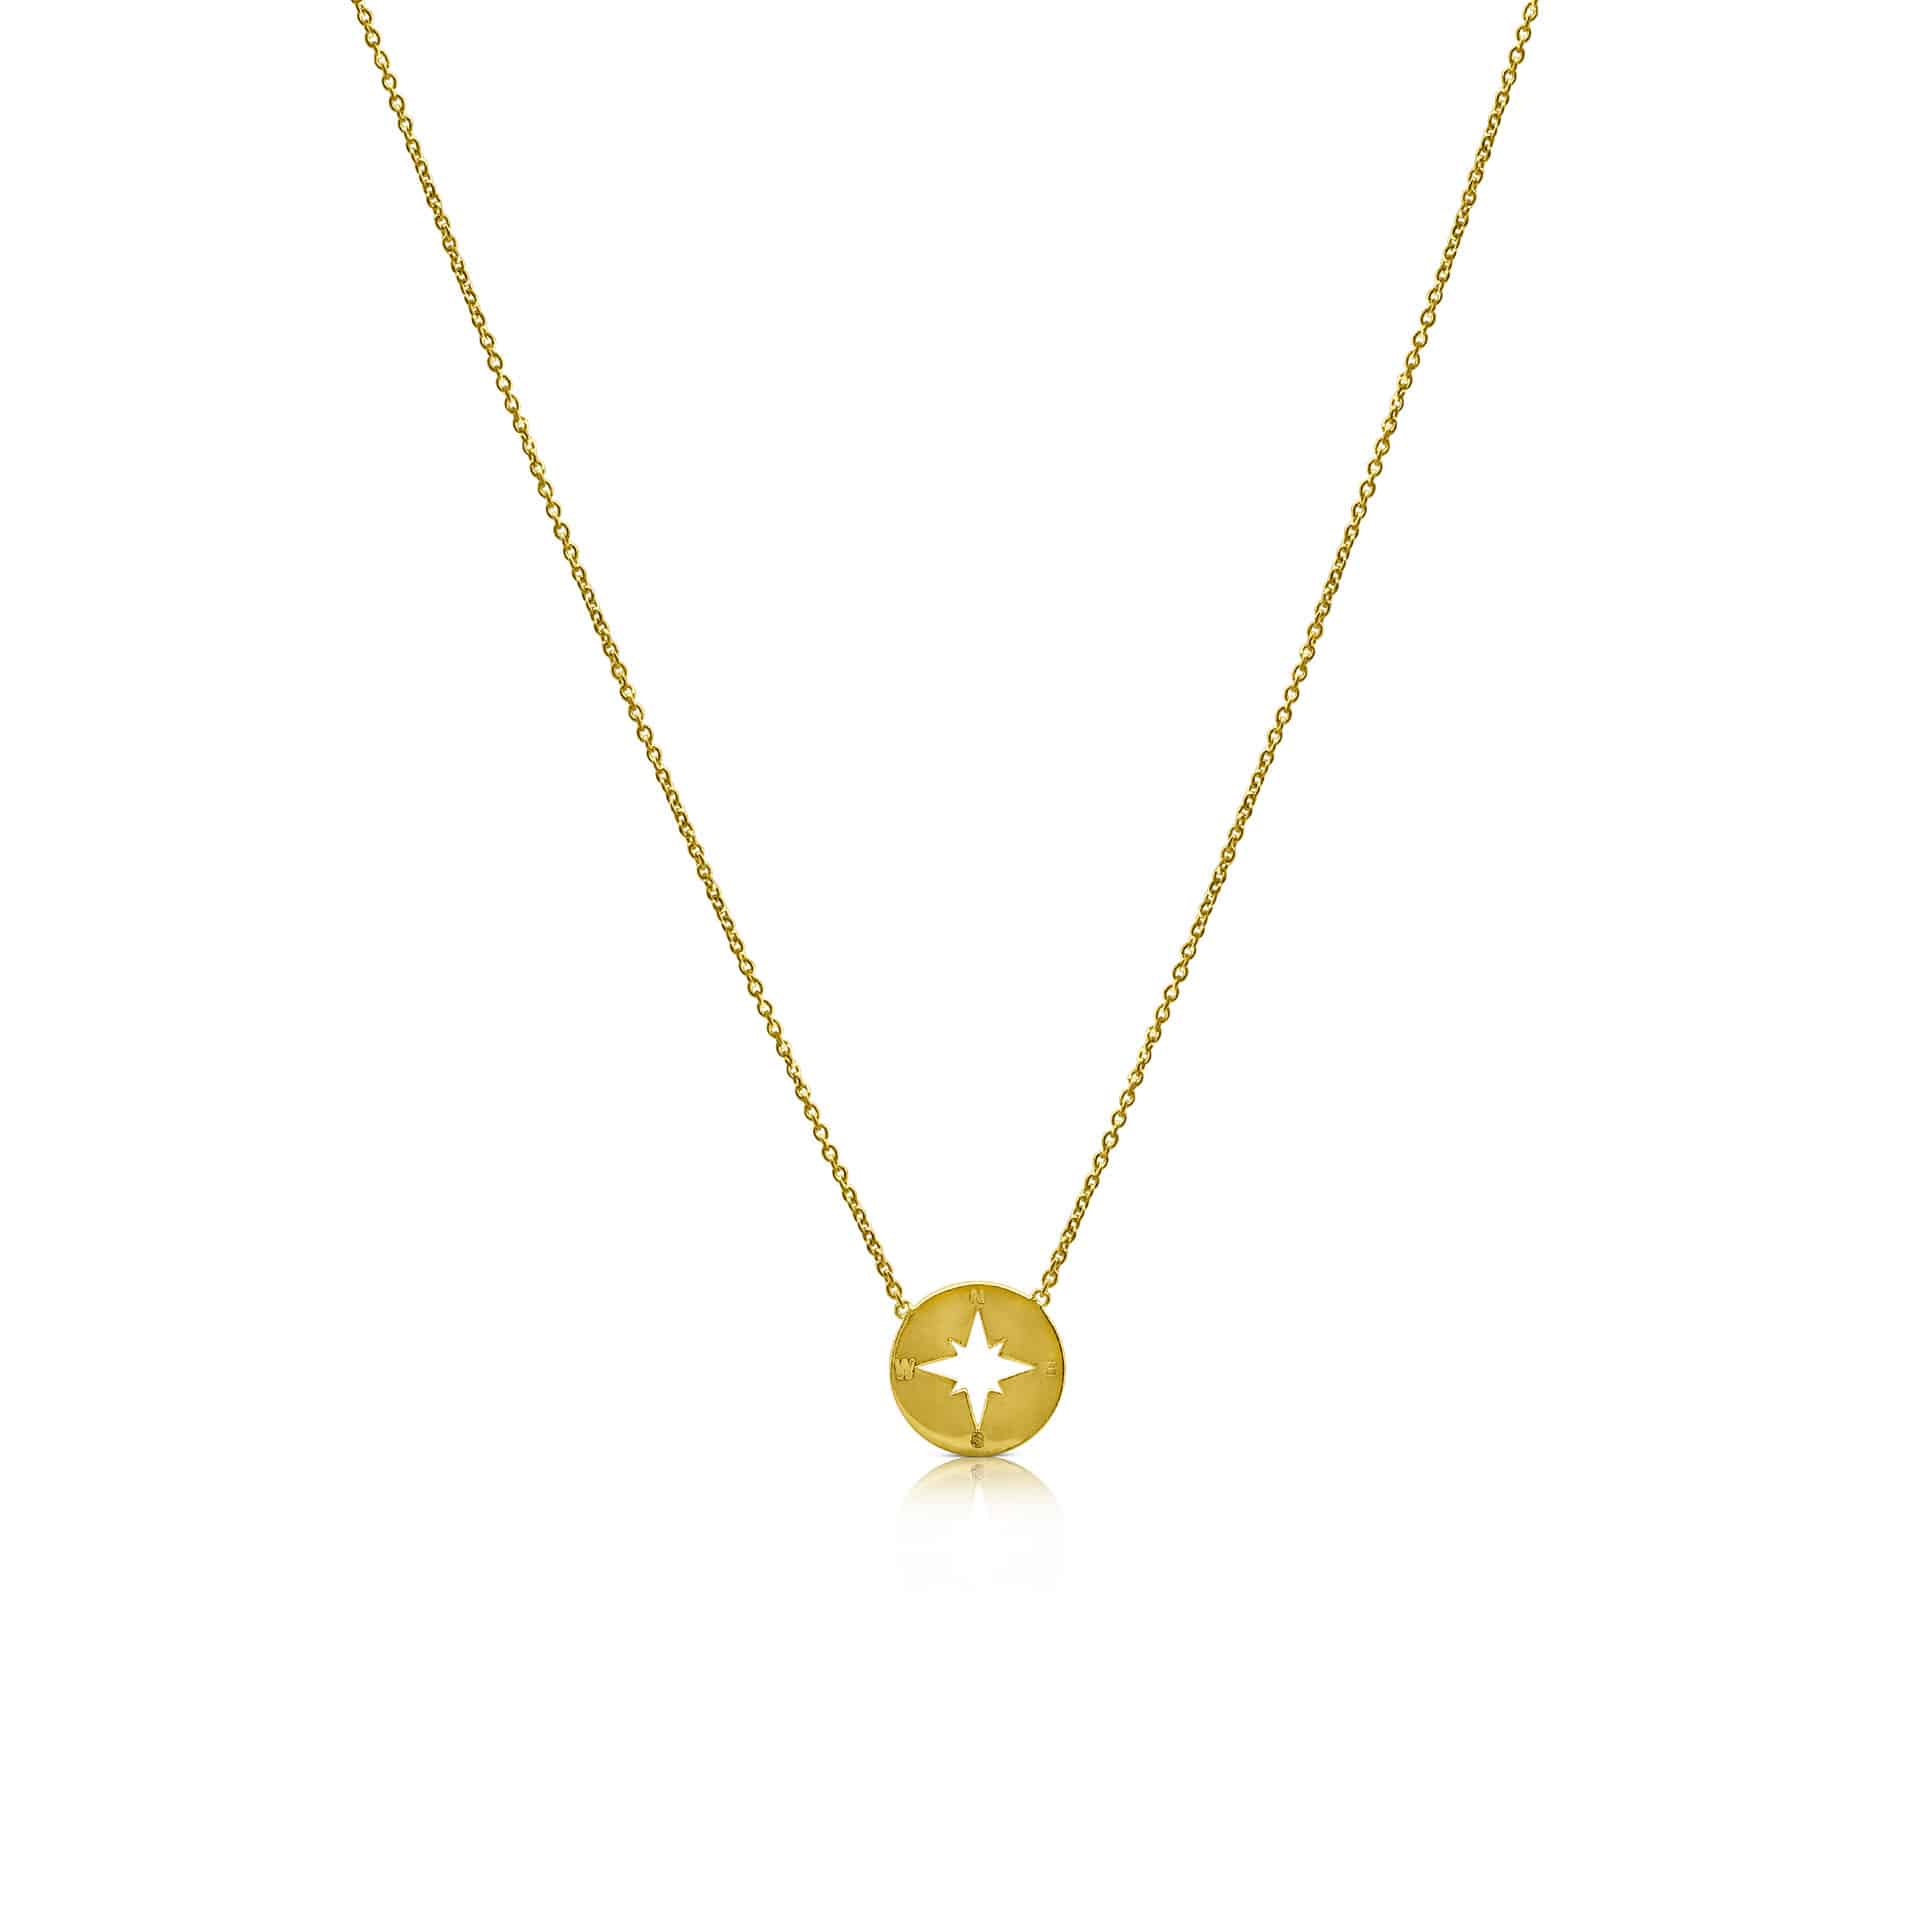 Ór Collection 9ct Yellow Gold Compass Necklace